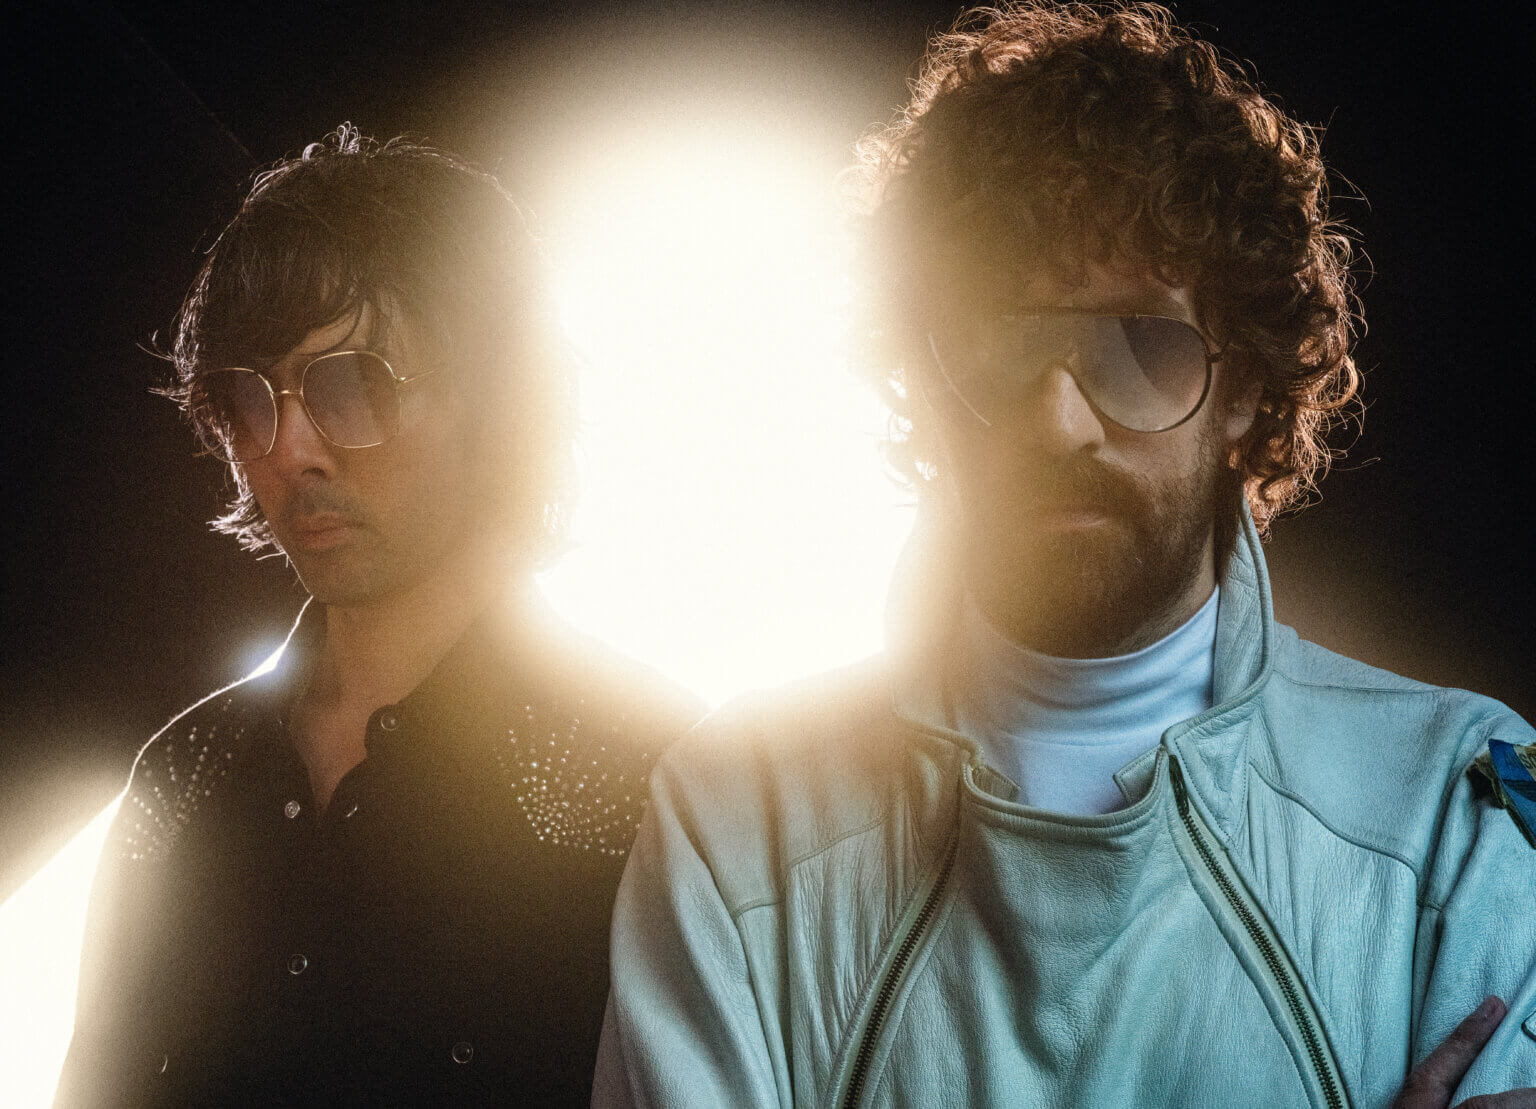 Justice Reinvent Themselves. Connor Rooney chatted with Justice members Gaspard Augé and Gaspard Augé to talk about their new album HYPERDRAMA